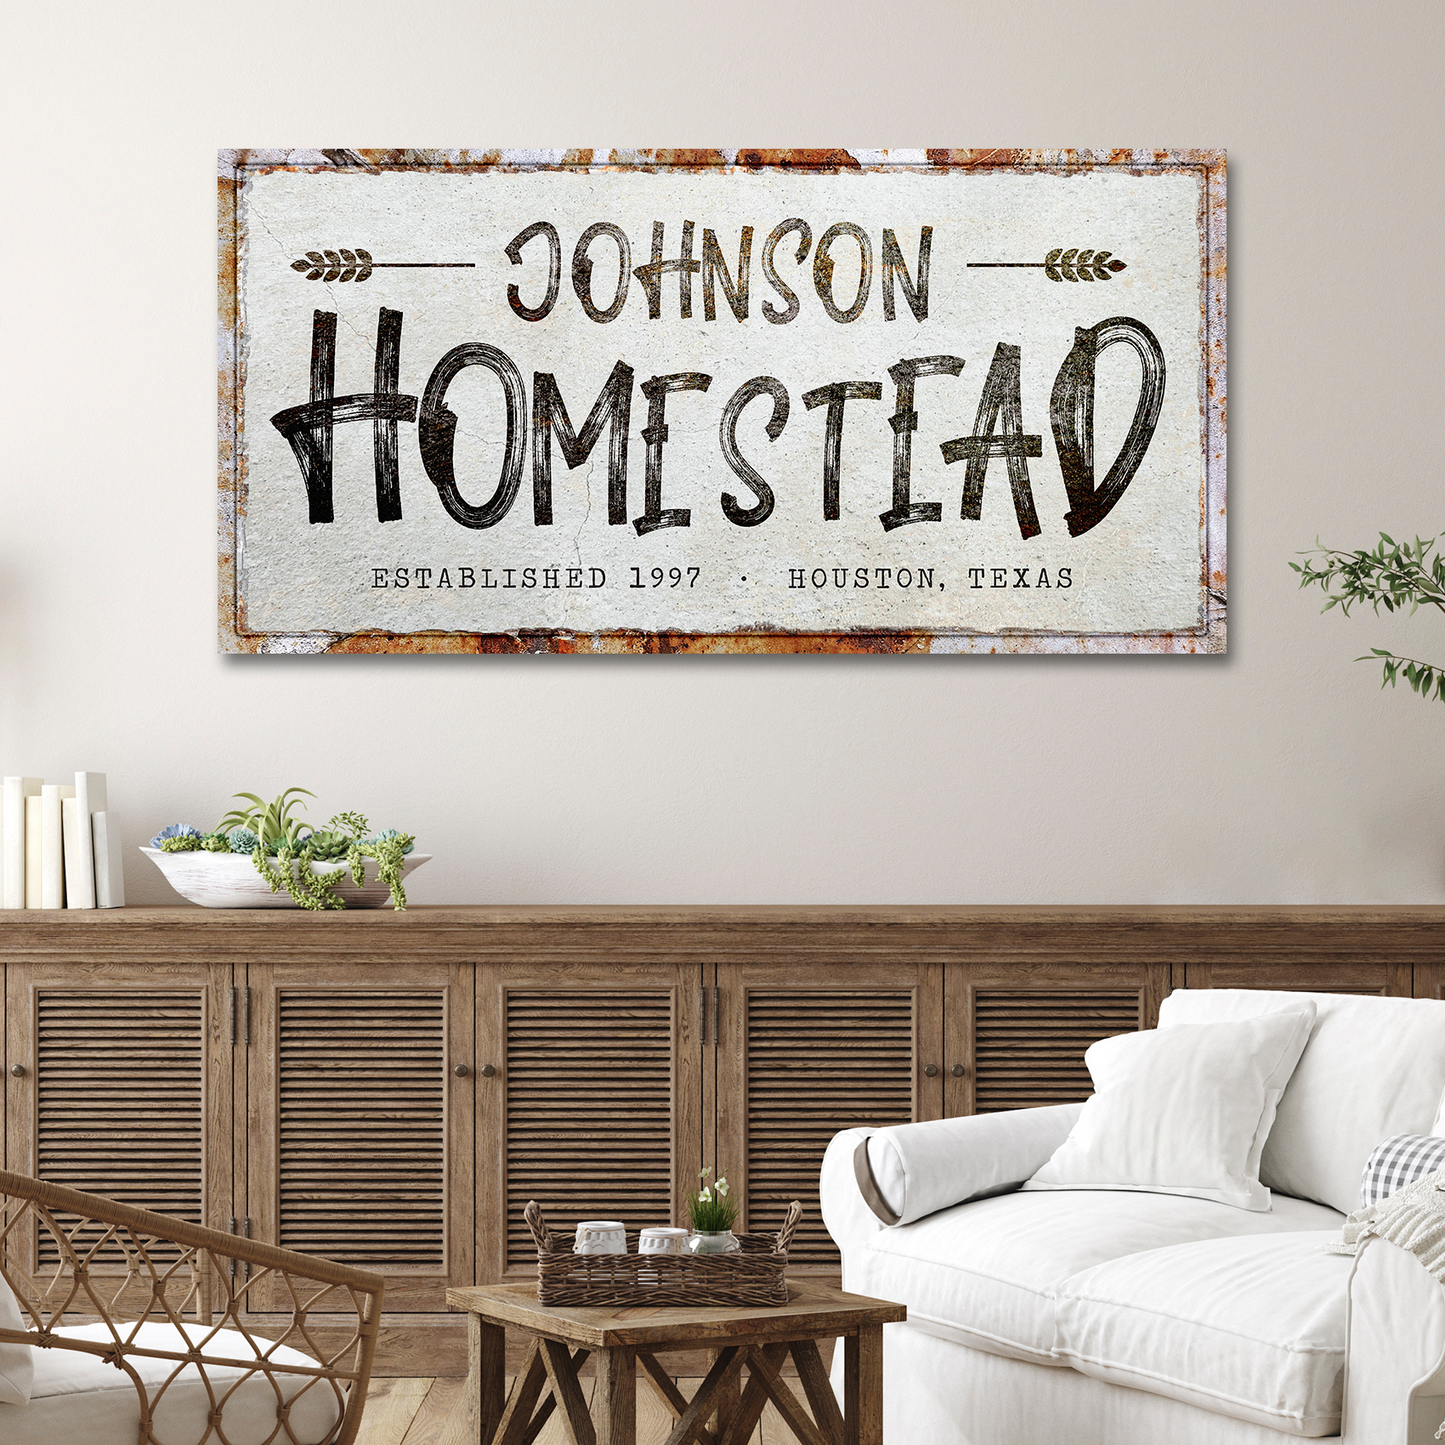 Family Homestead Sign - Image by Tailored Canvases